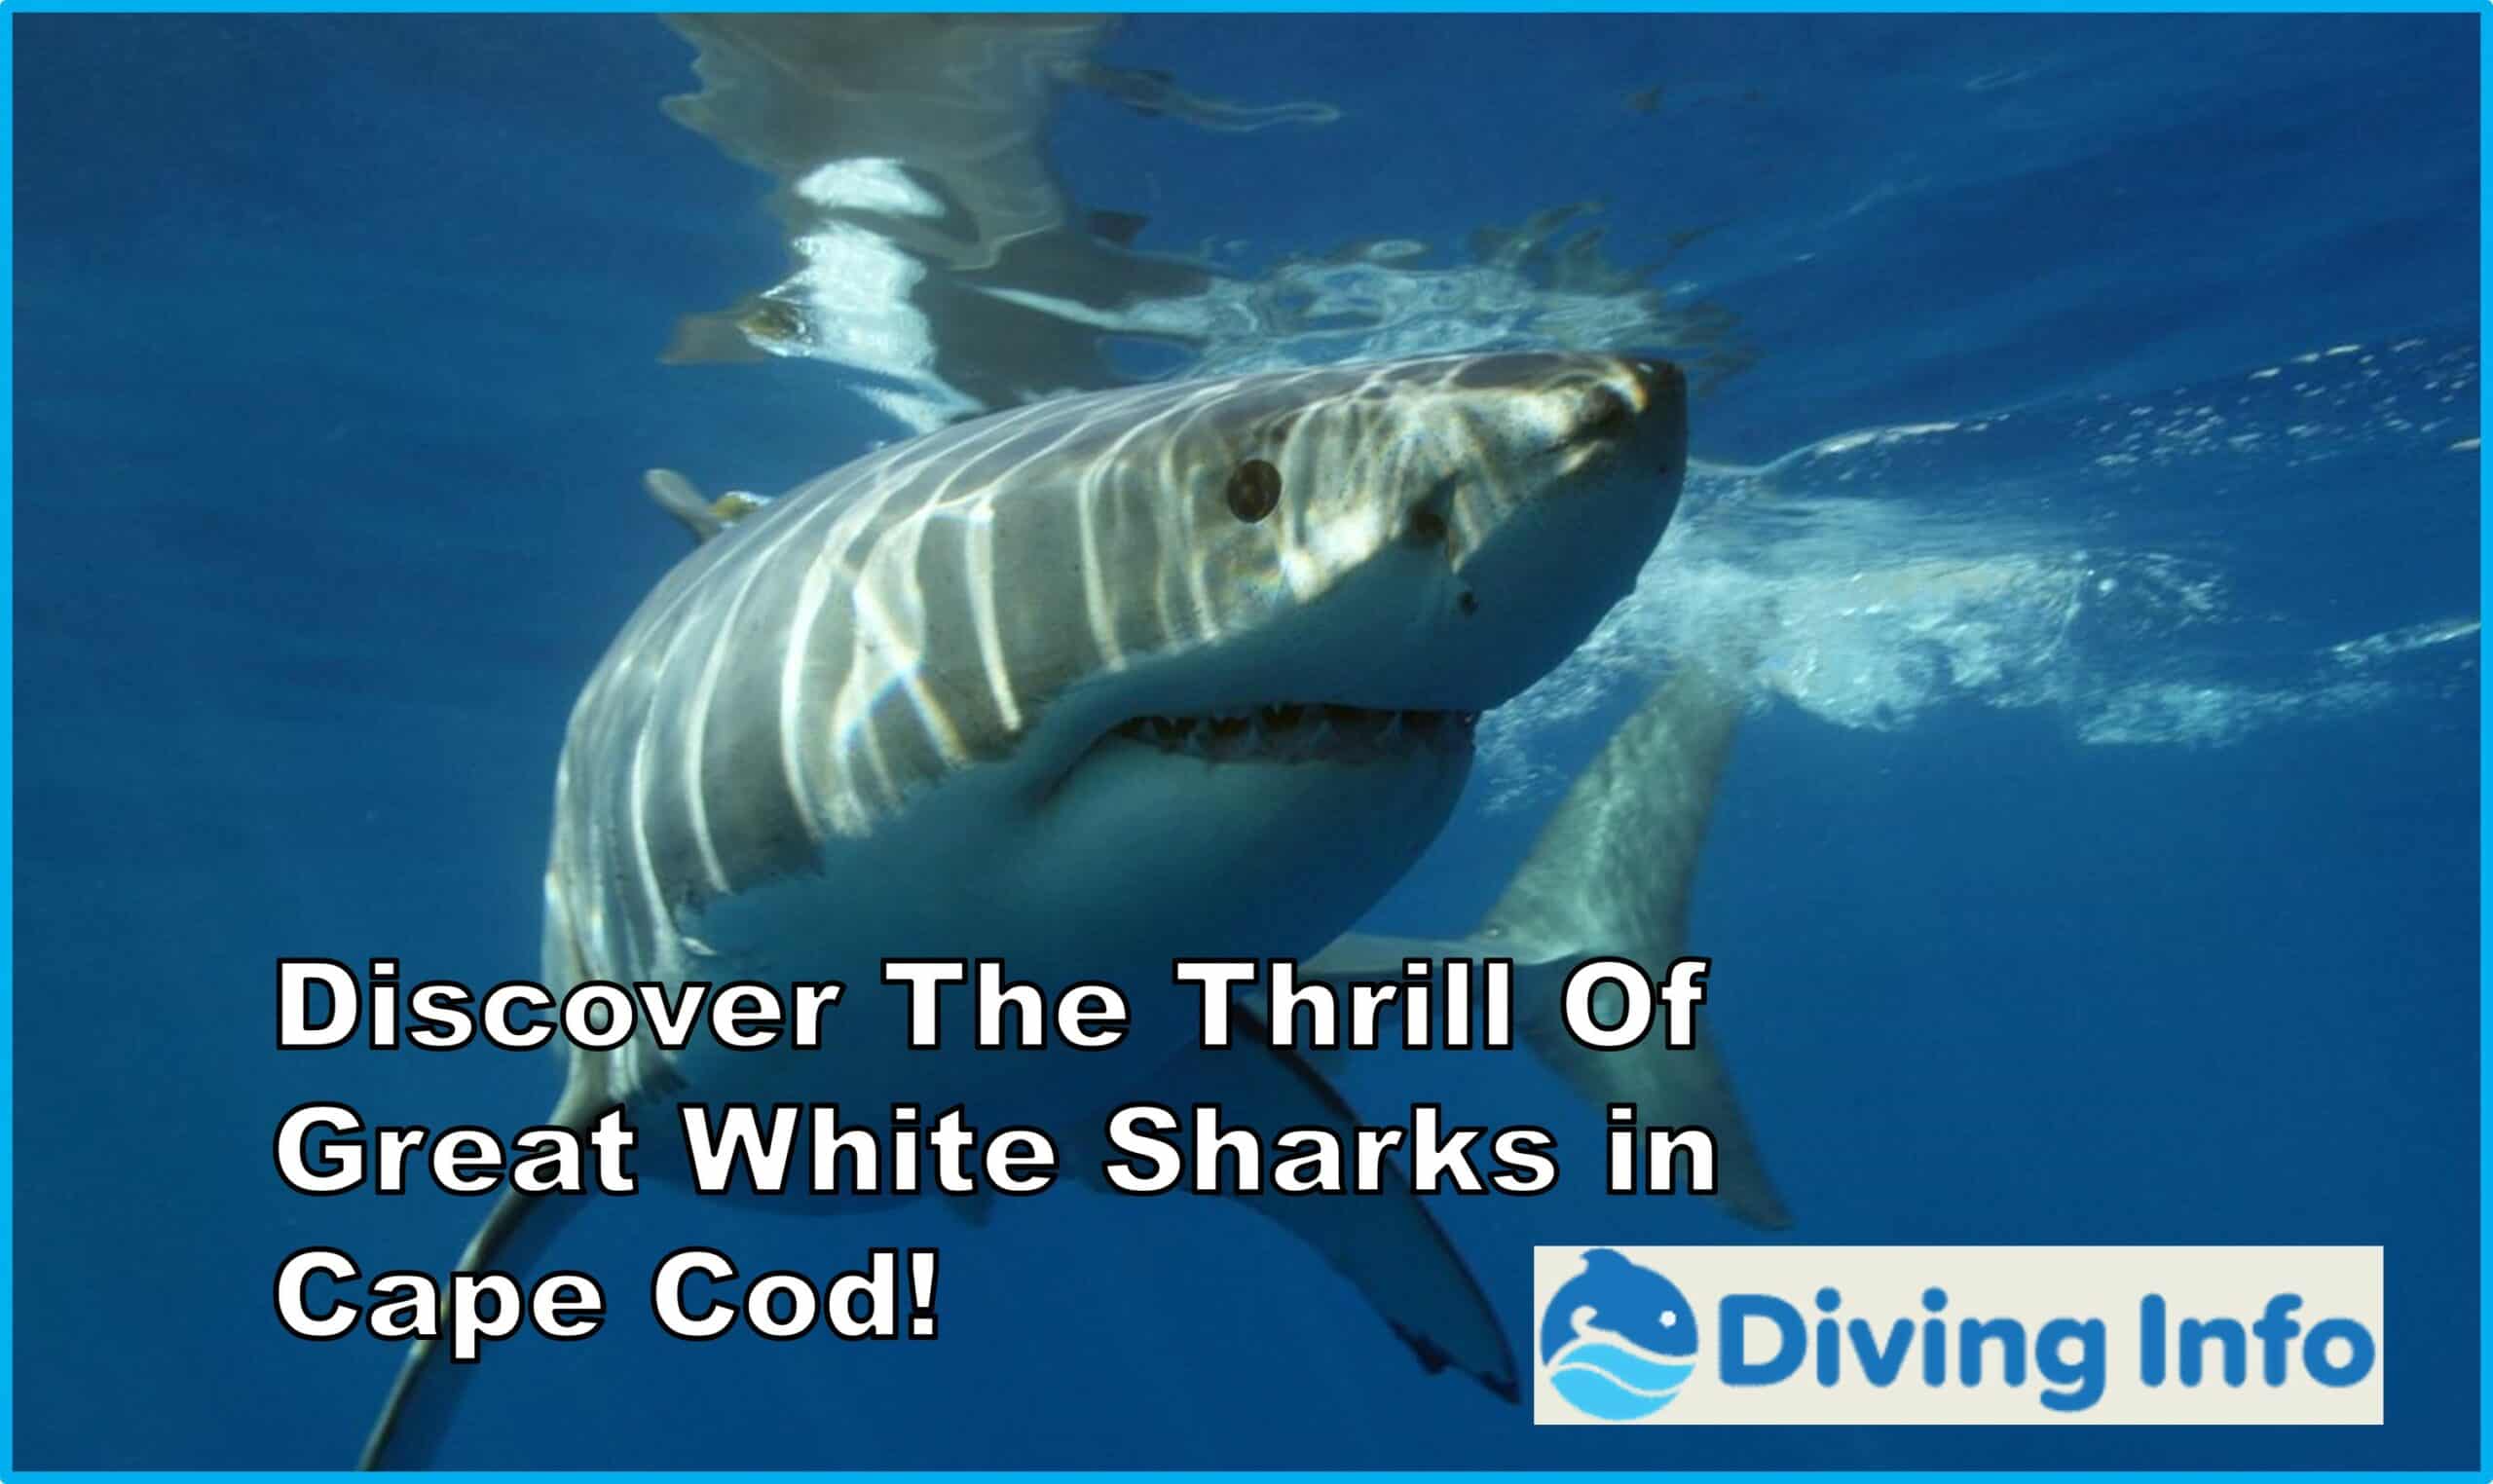 Discover The Thrill Of Great White Sharks in Cape Cod